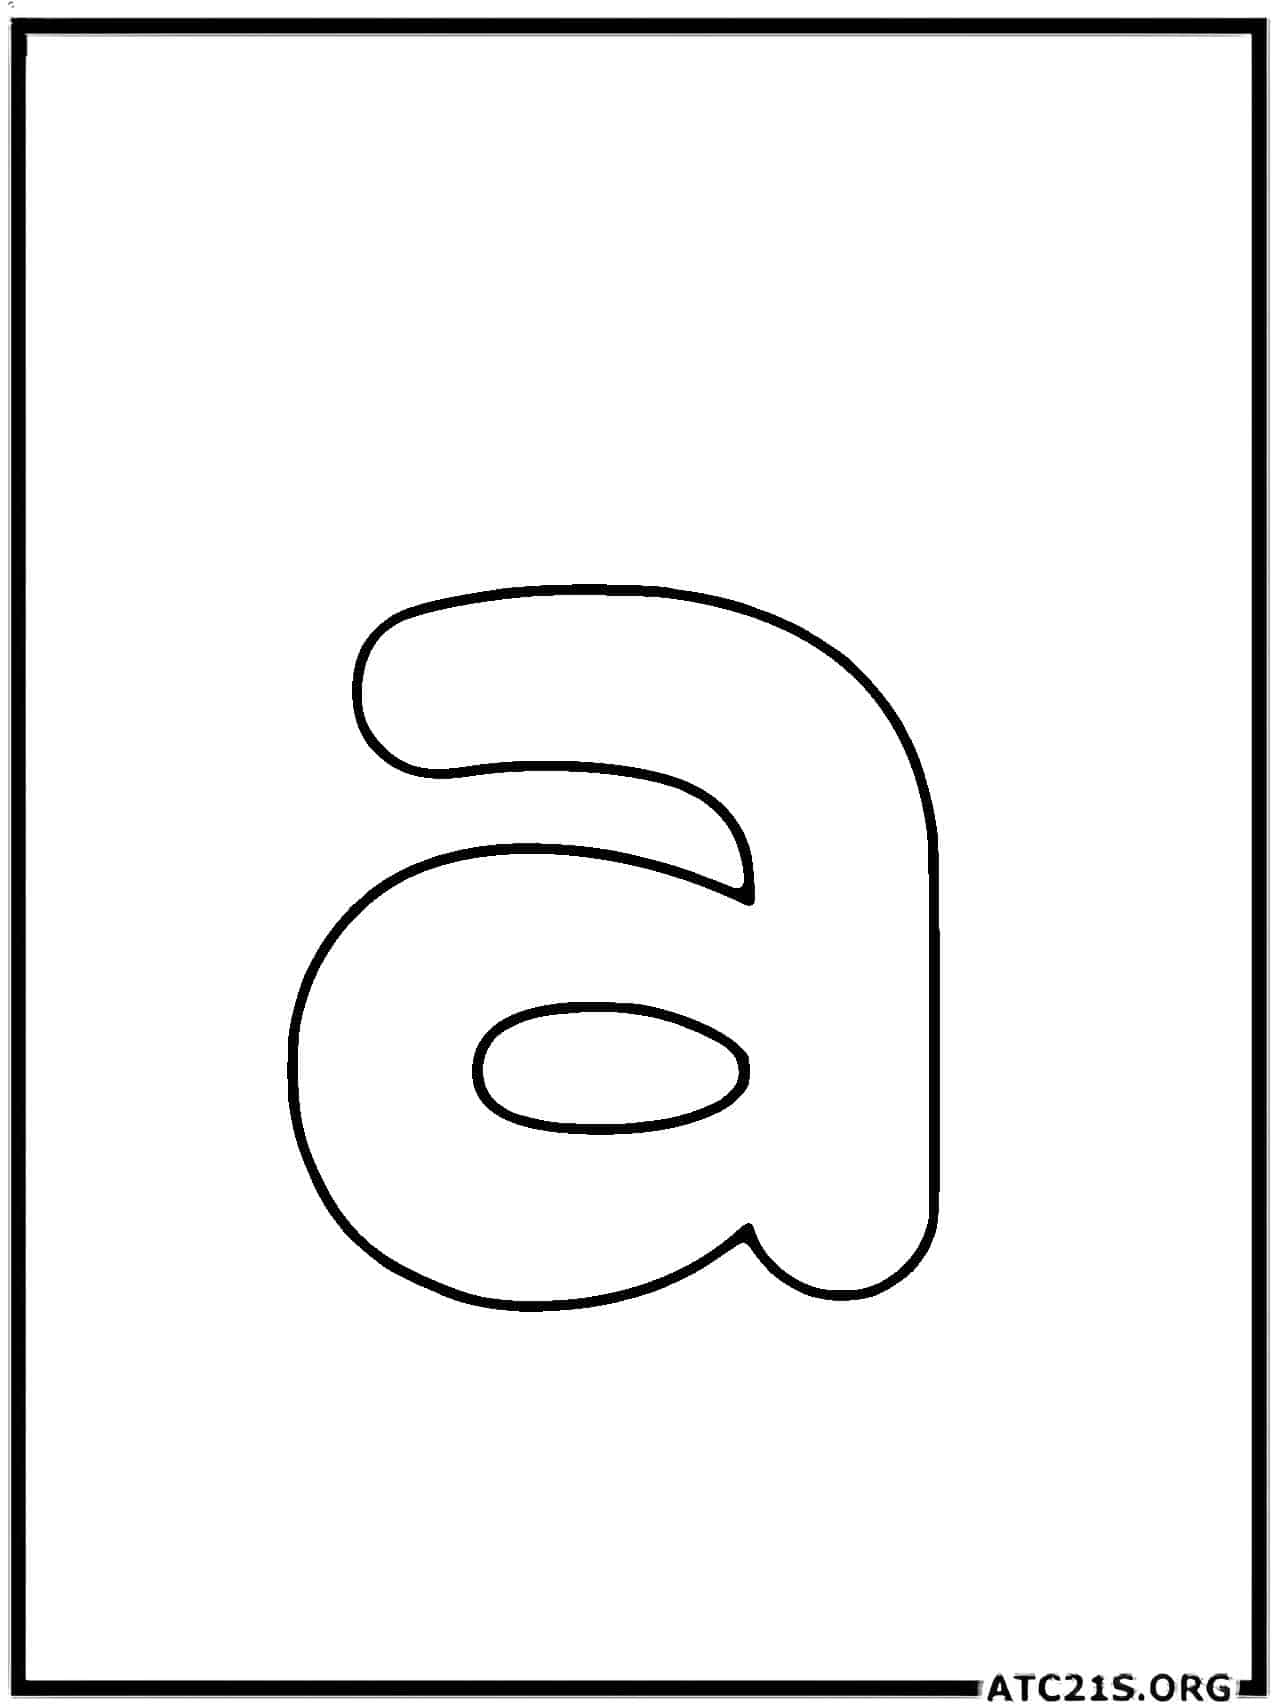 letter_a_lowercase_coloring_page